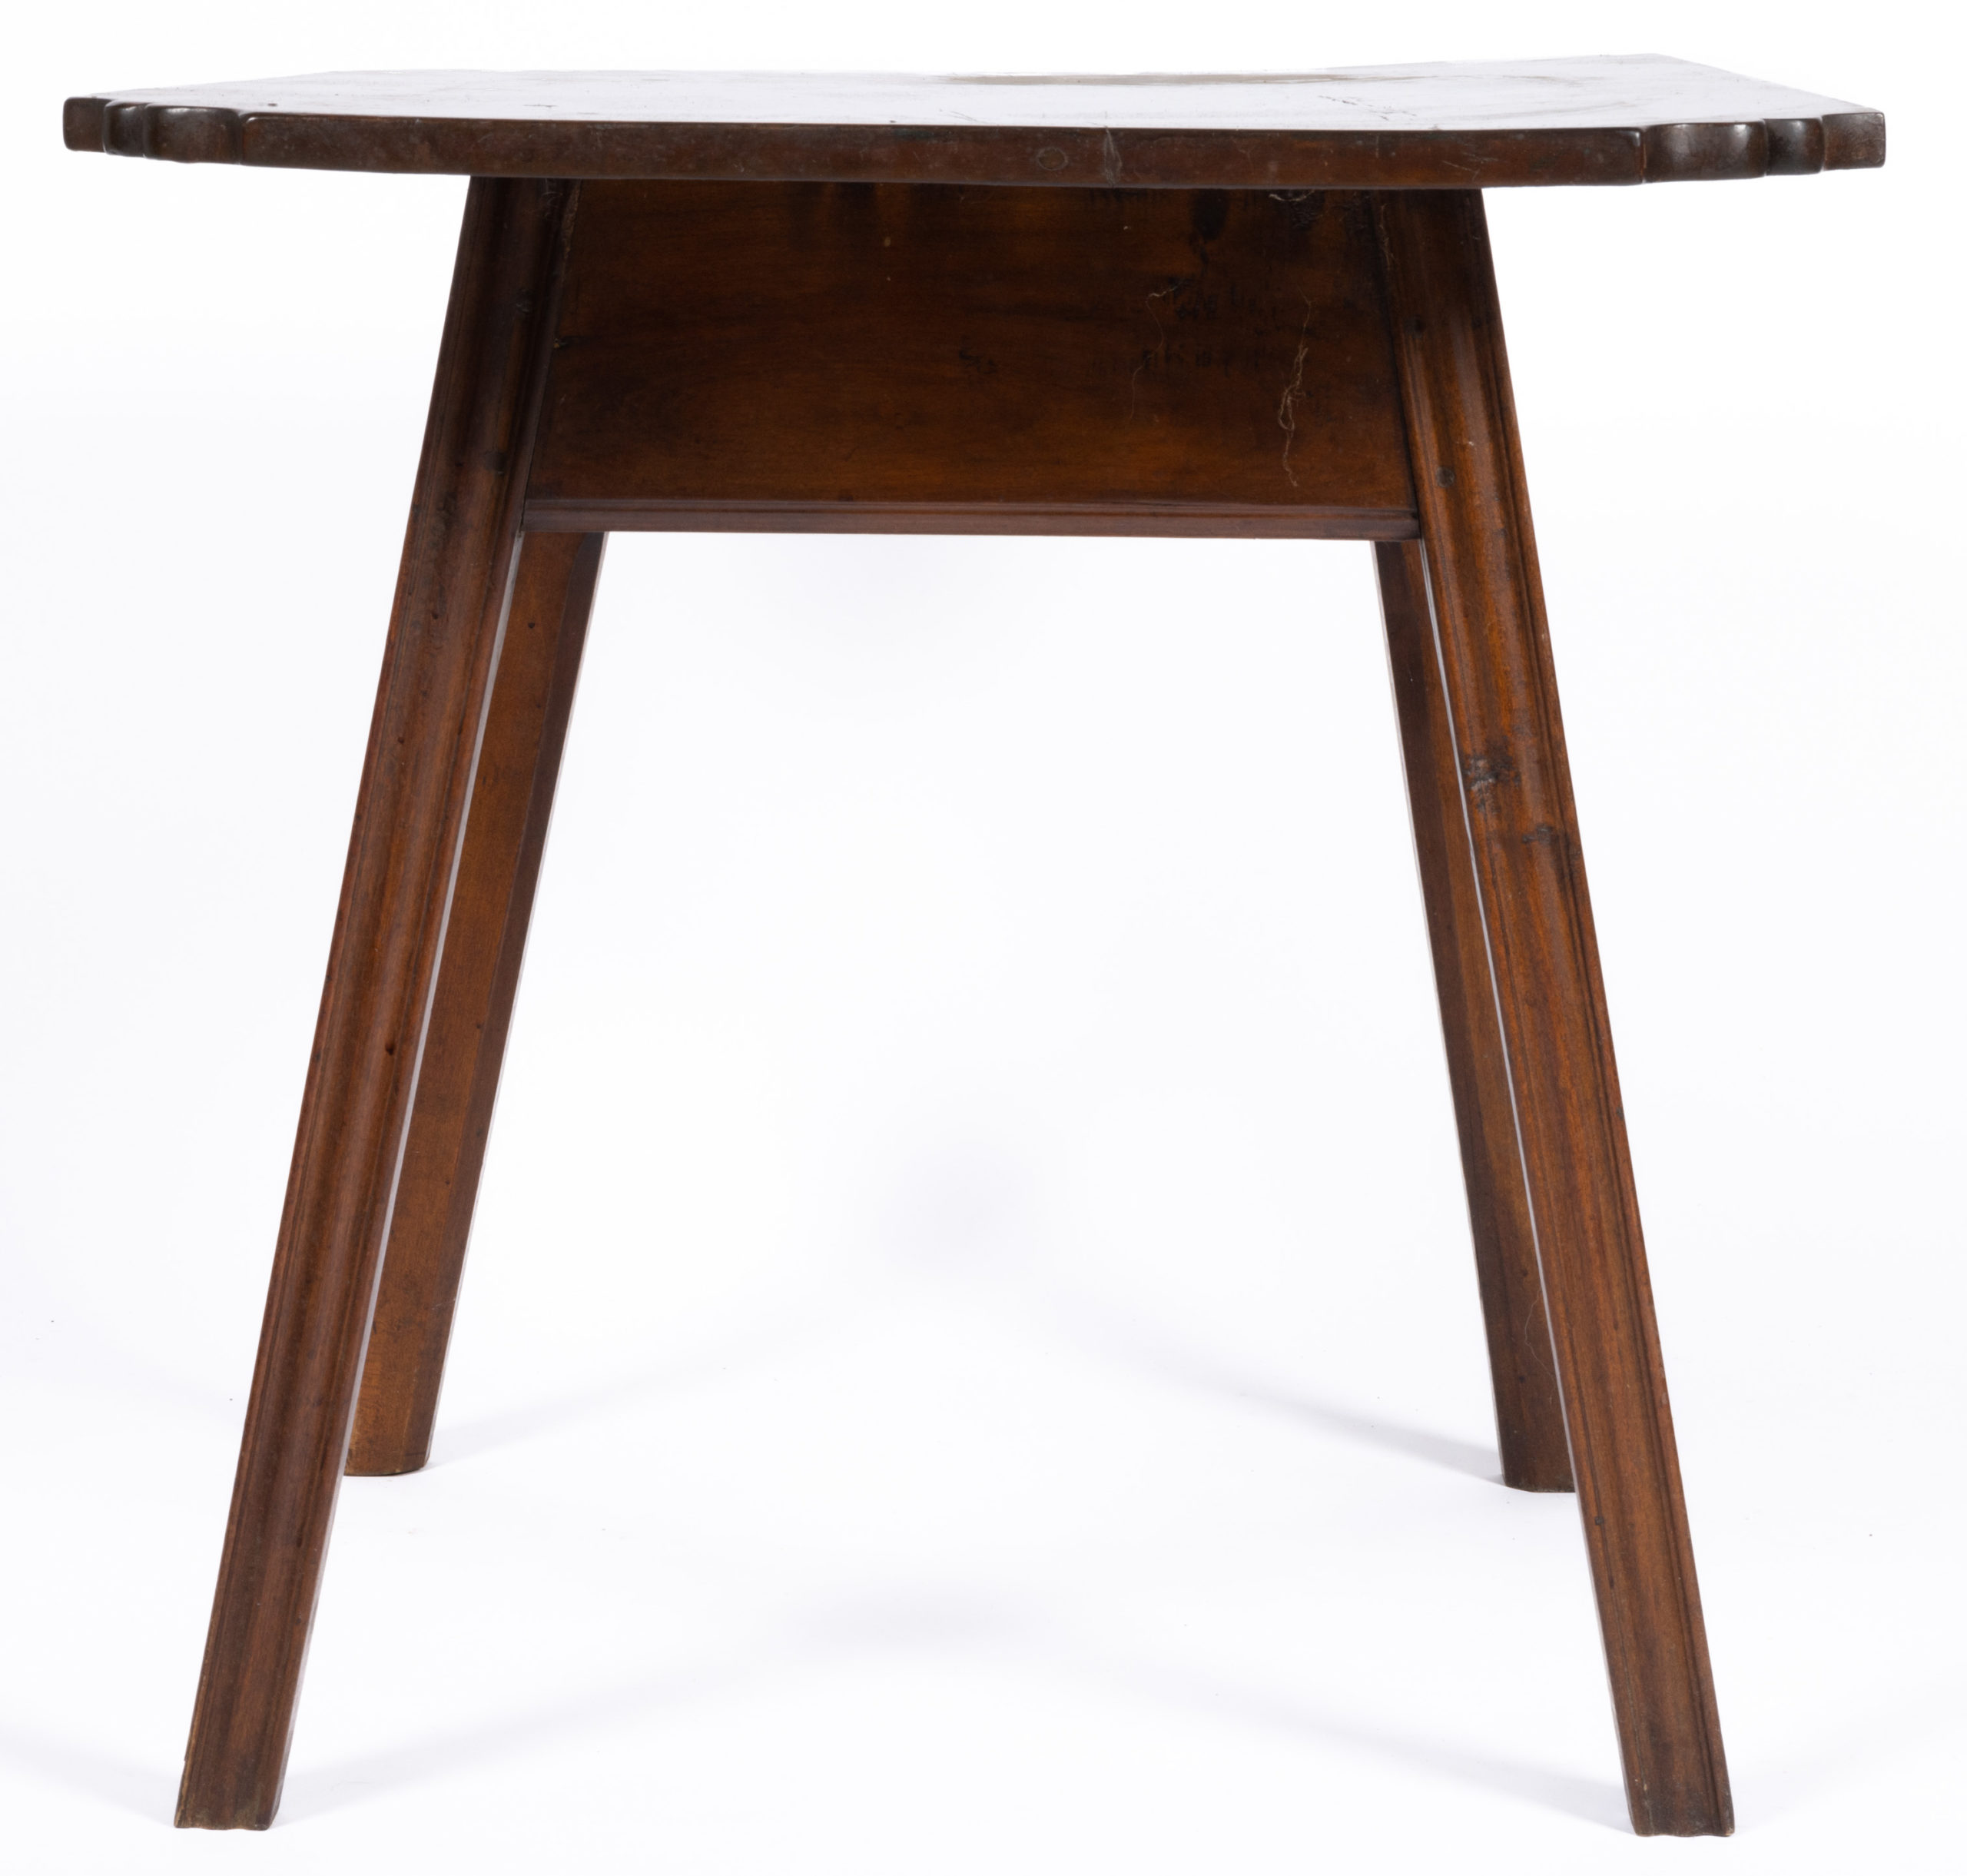 AMERICAN CHIPPENDALE WALNUT STAND TABLE,